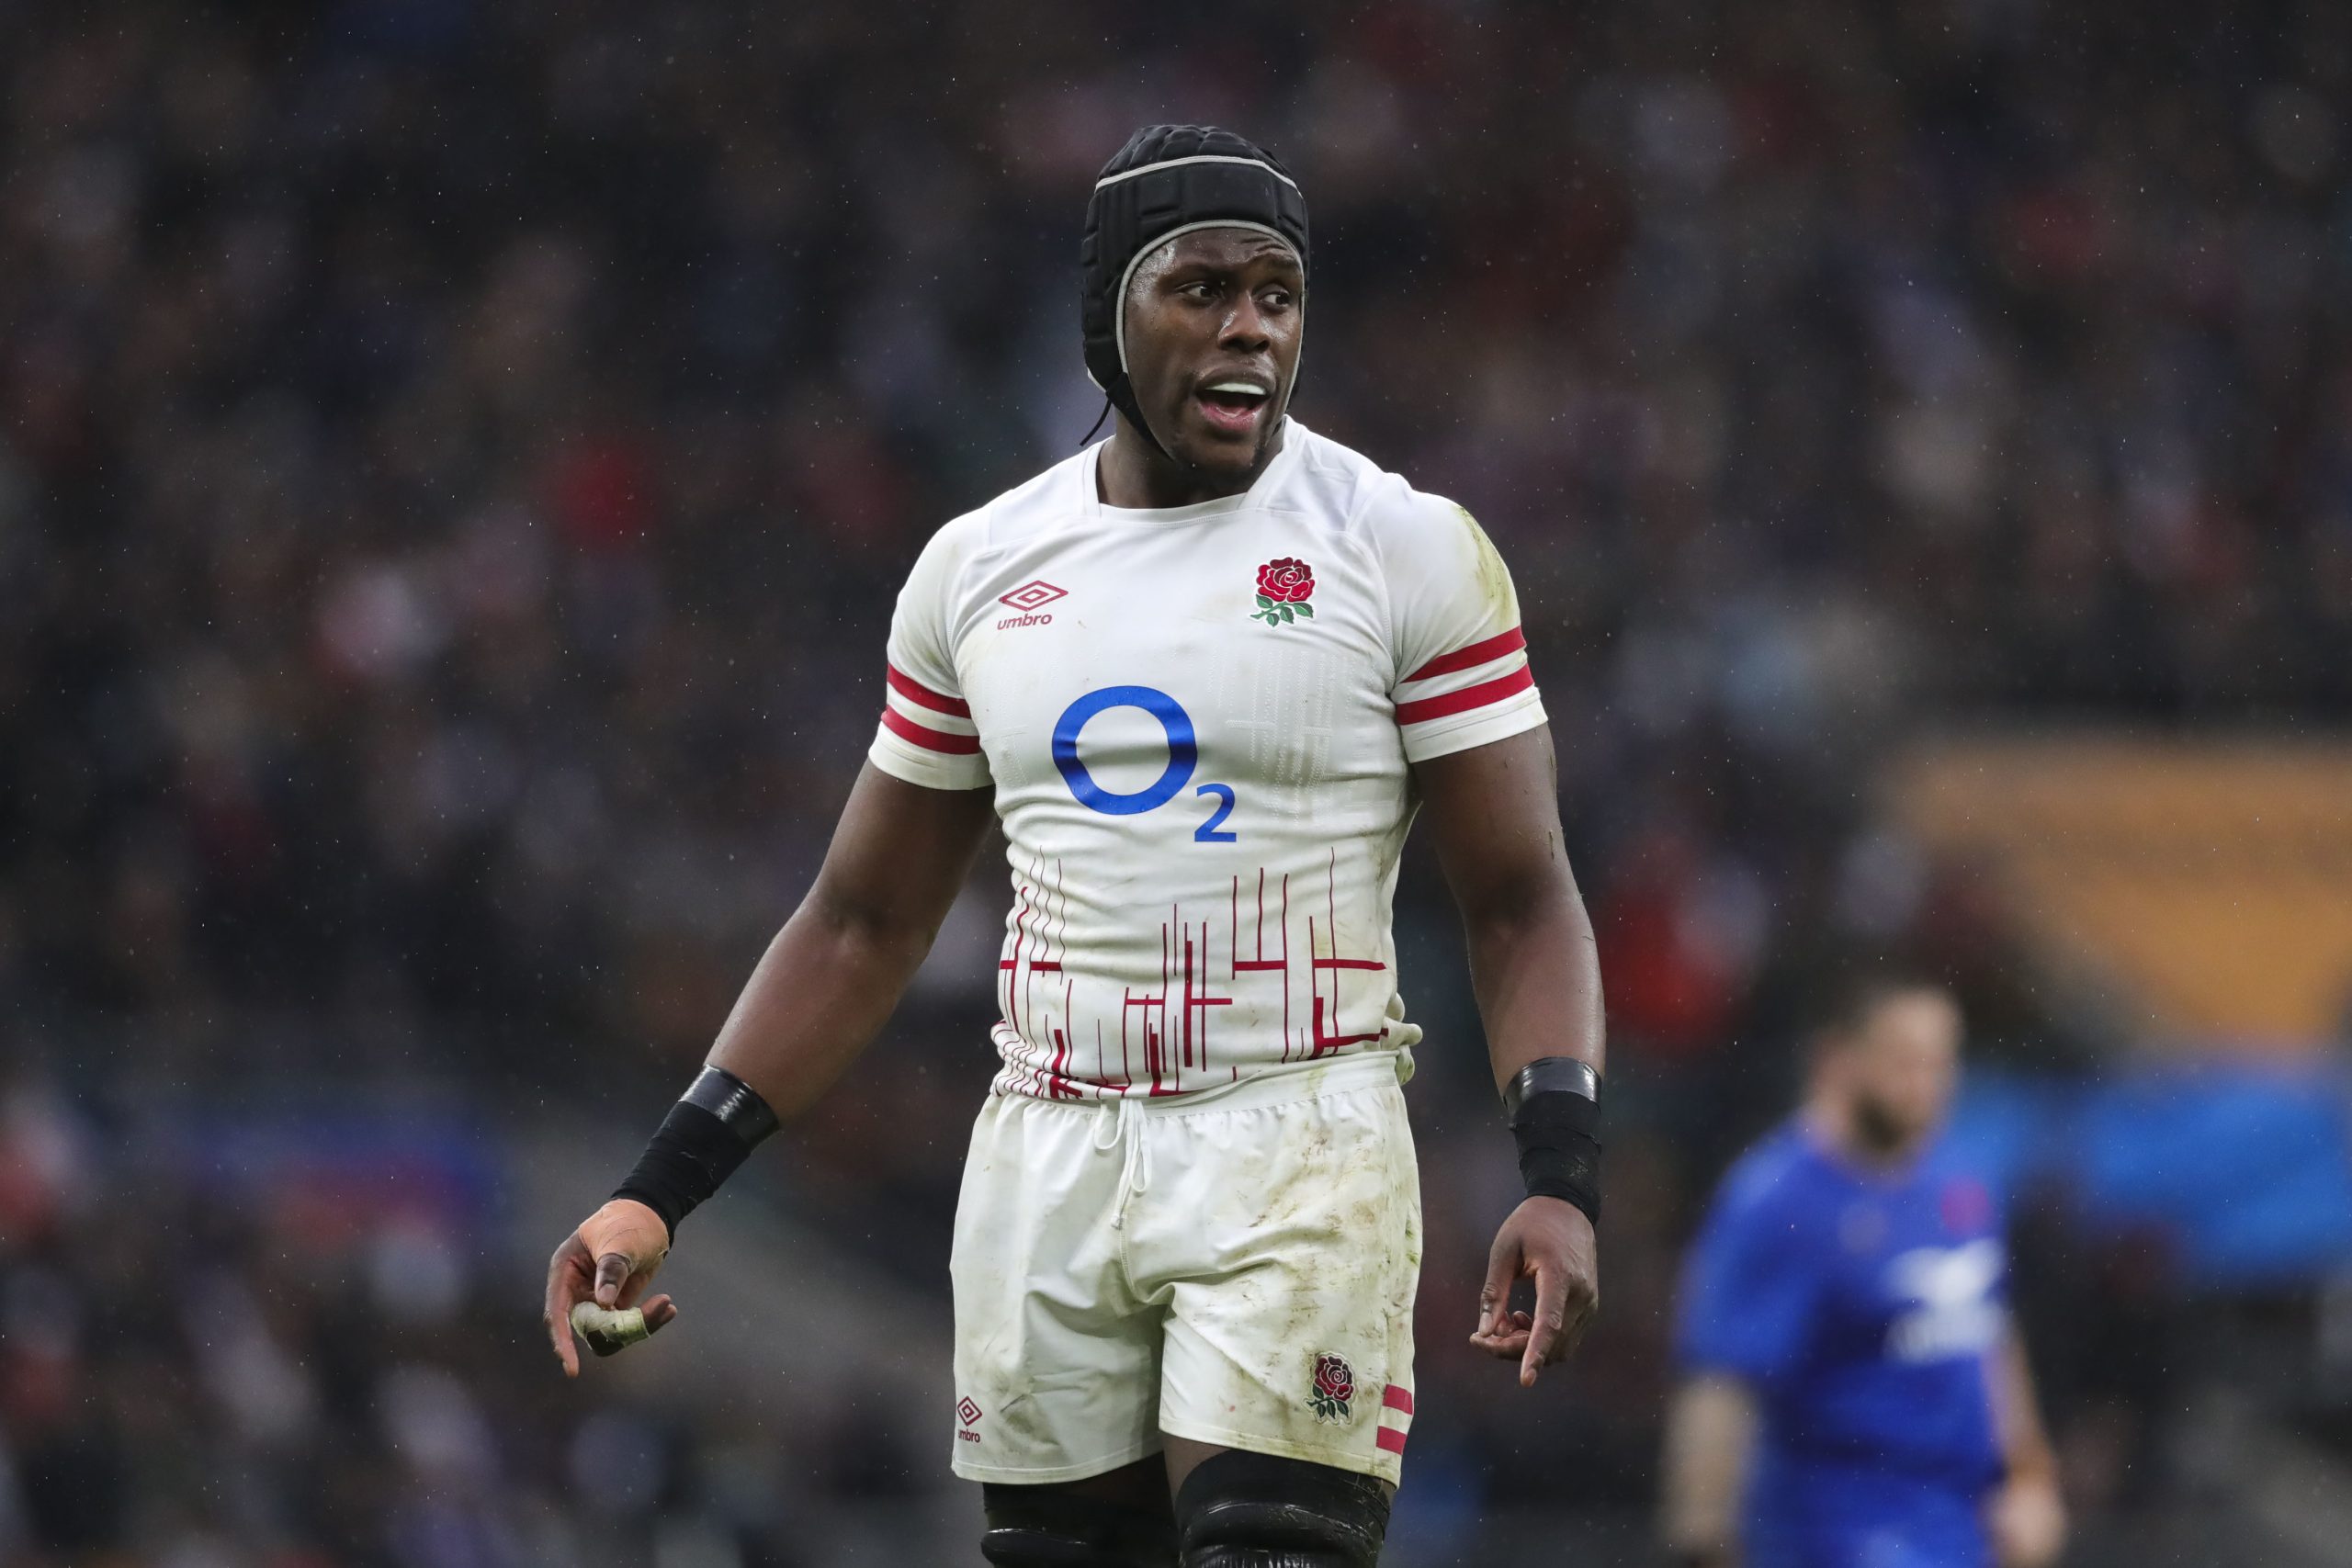 Not a great place to be – Maro Itoje says racism has to be eradicated from rugby